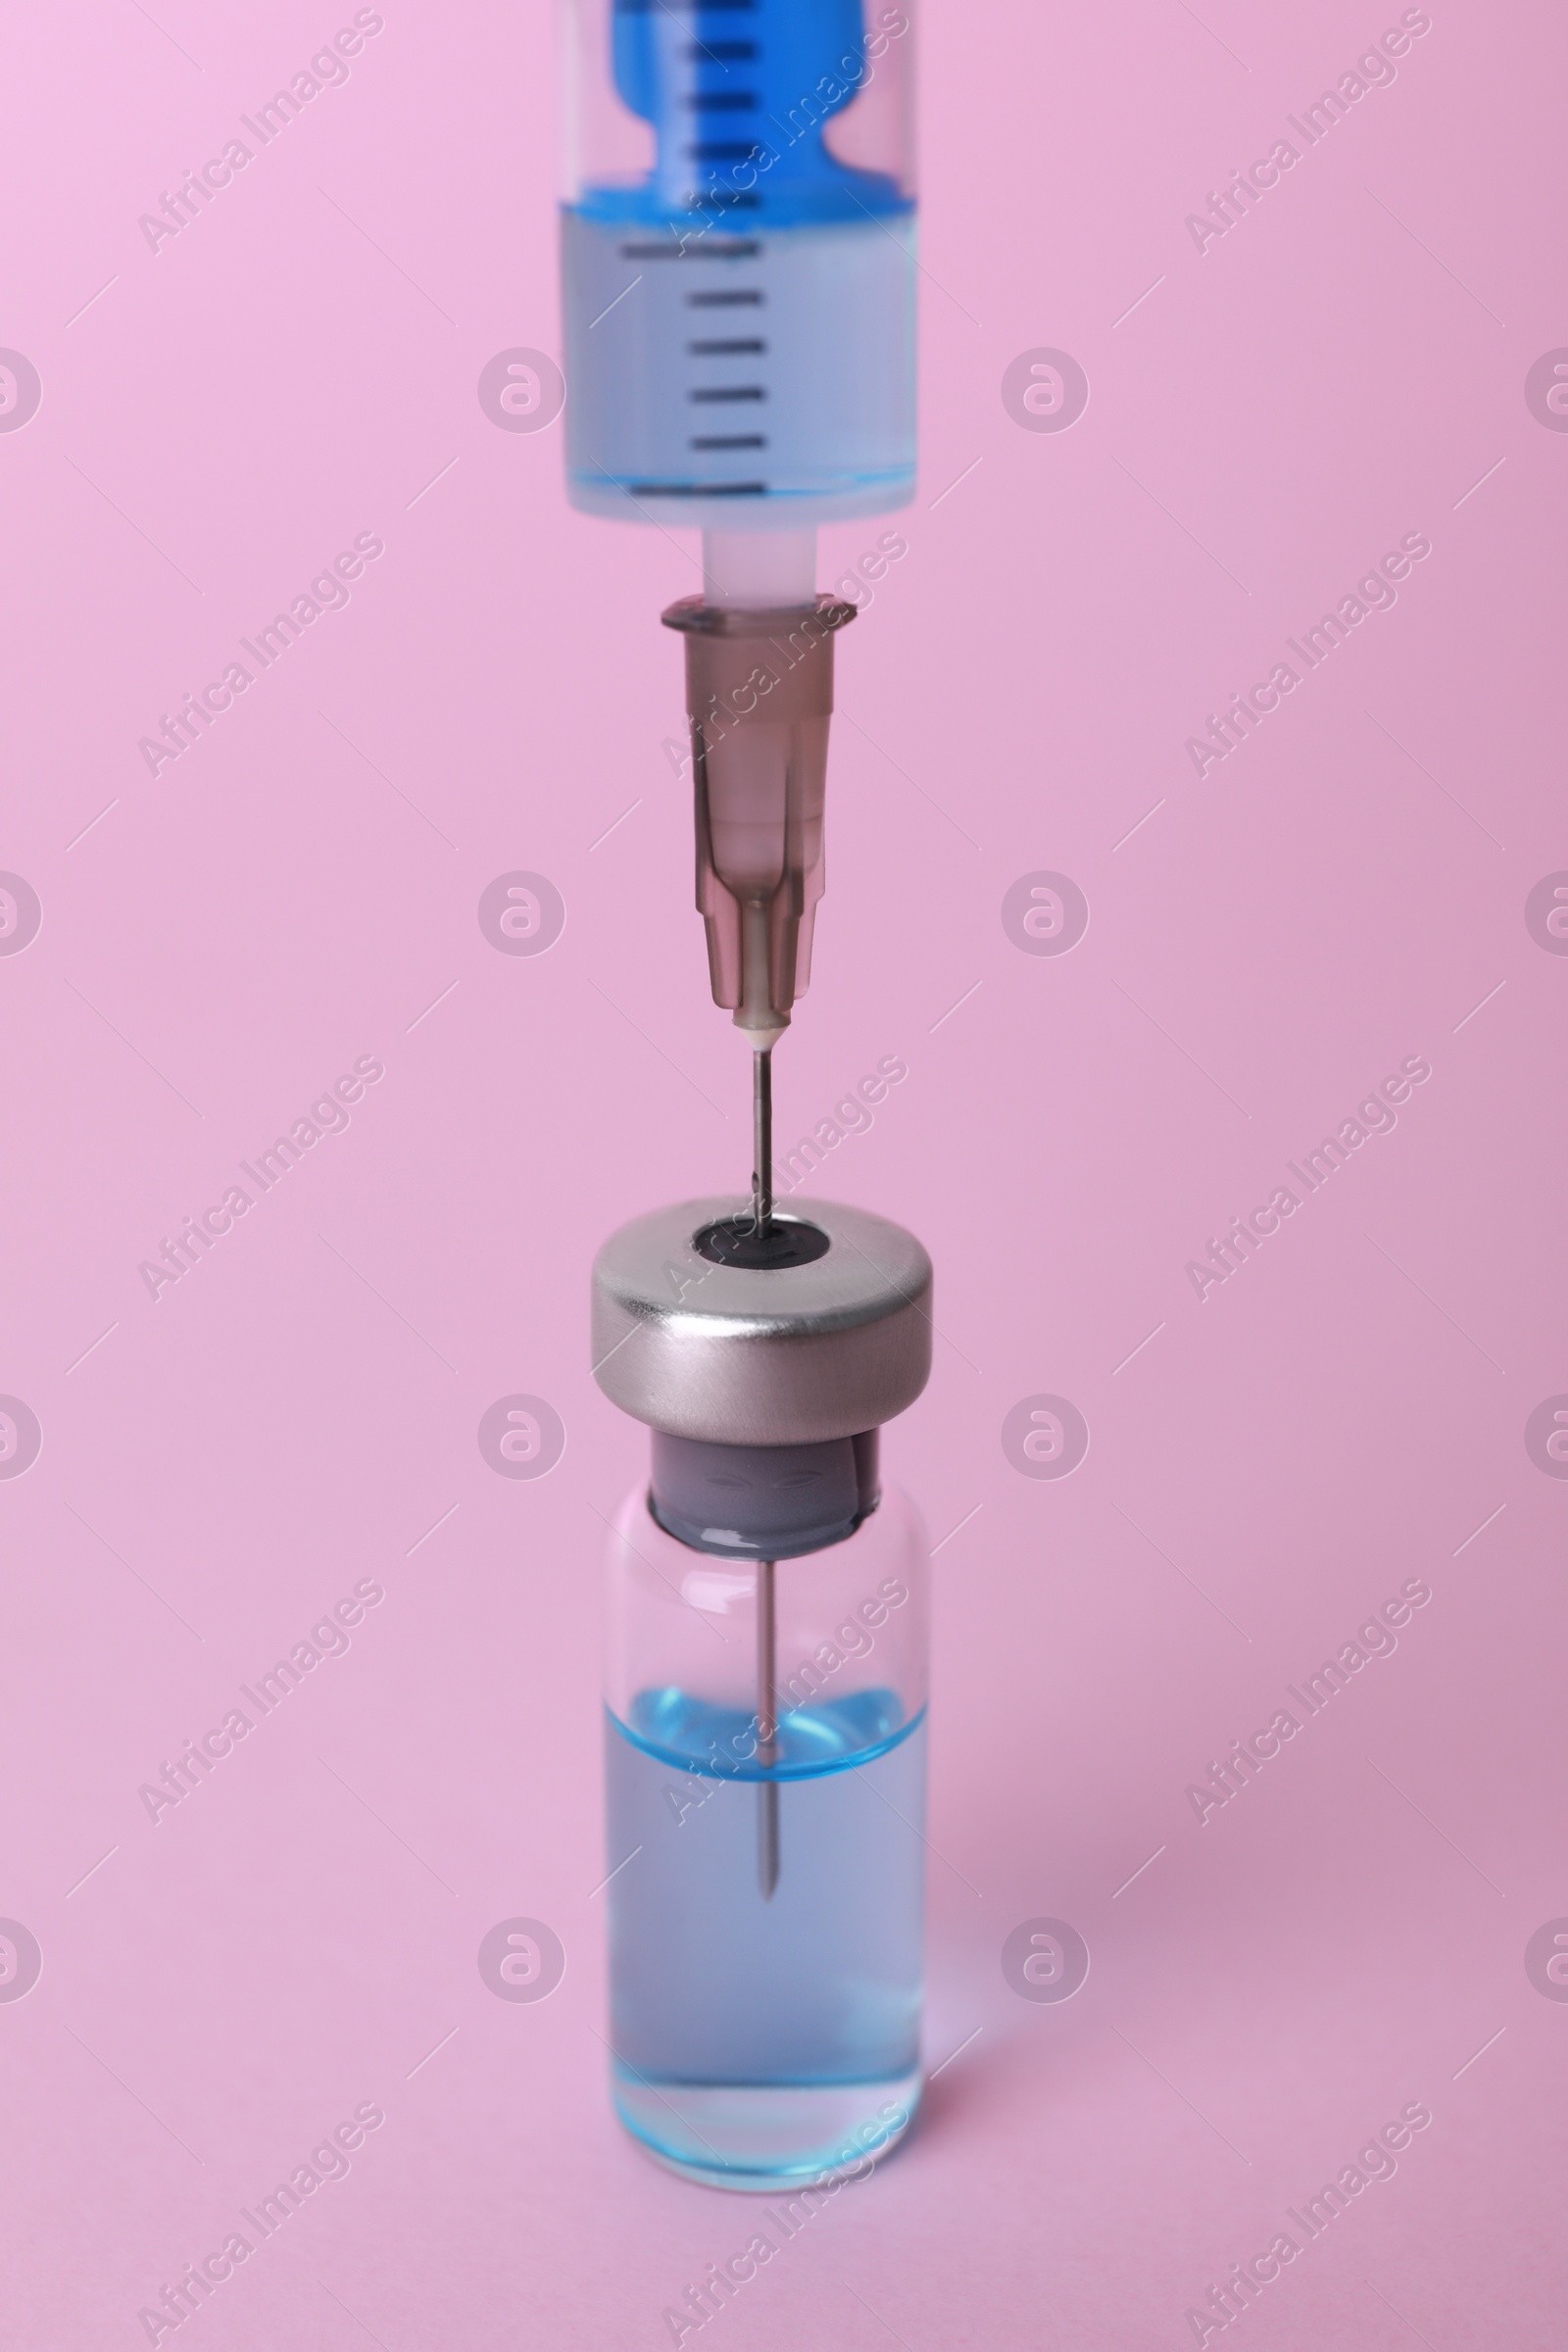 Photo of Disposable syringe with needle and vial on pink background, closeup